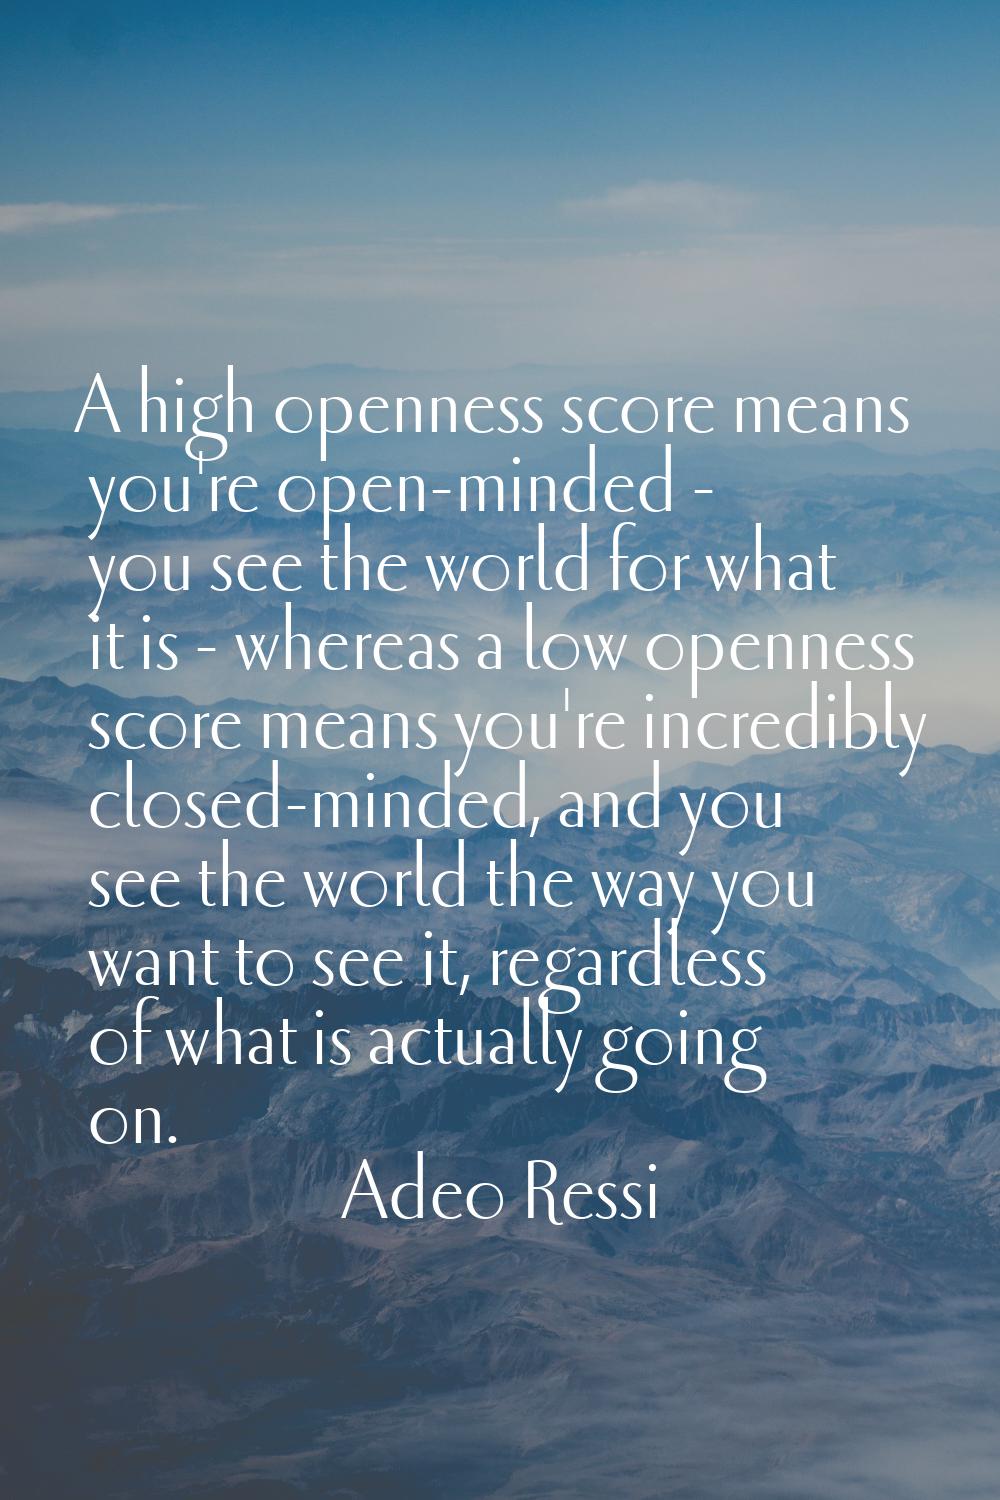 A high openness score means you're open-minded - you see the world for what it is - whereas a low o